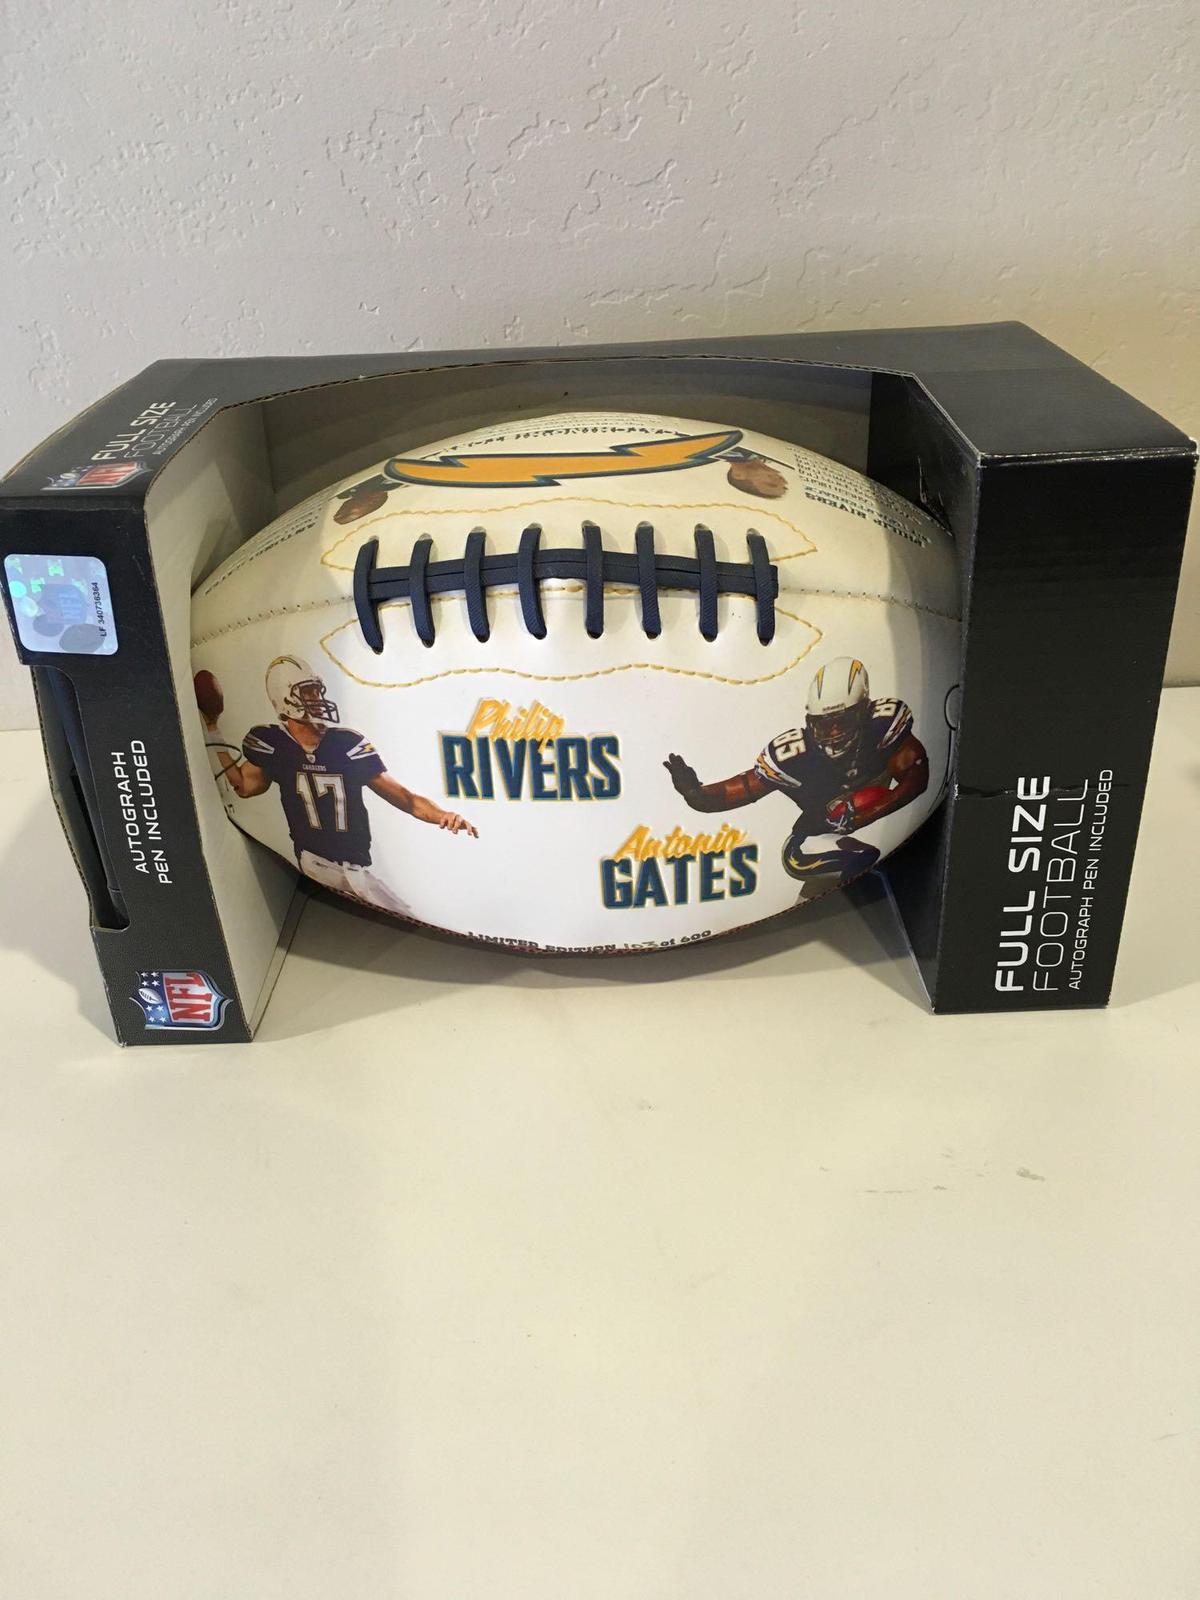 Rivers / Gates Commemorative Football Limited Edition 103 of 600 Full size Football,